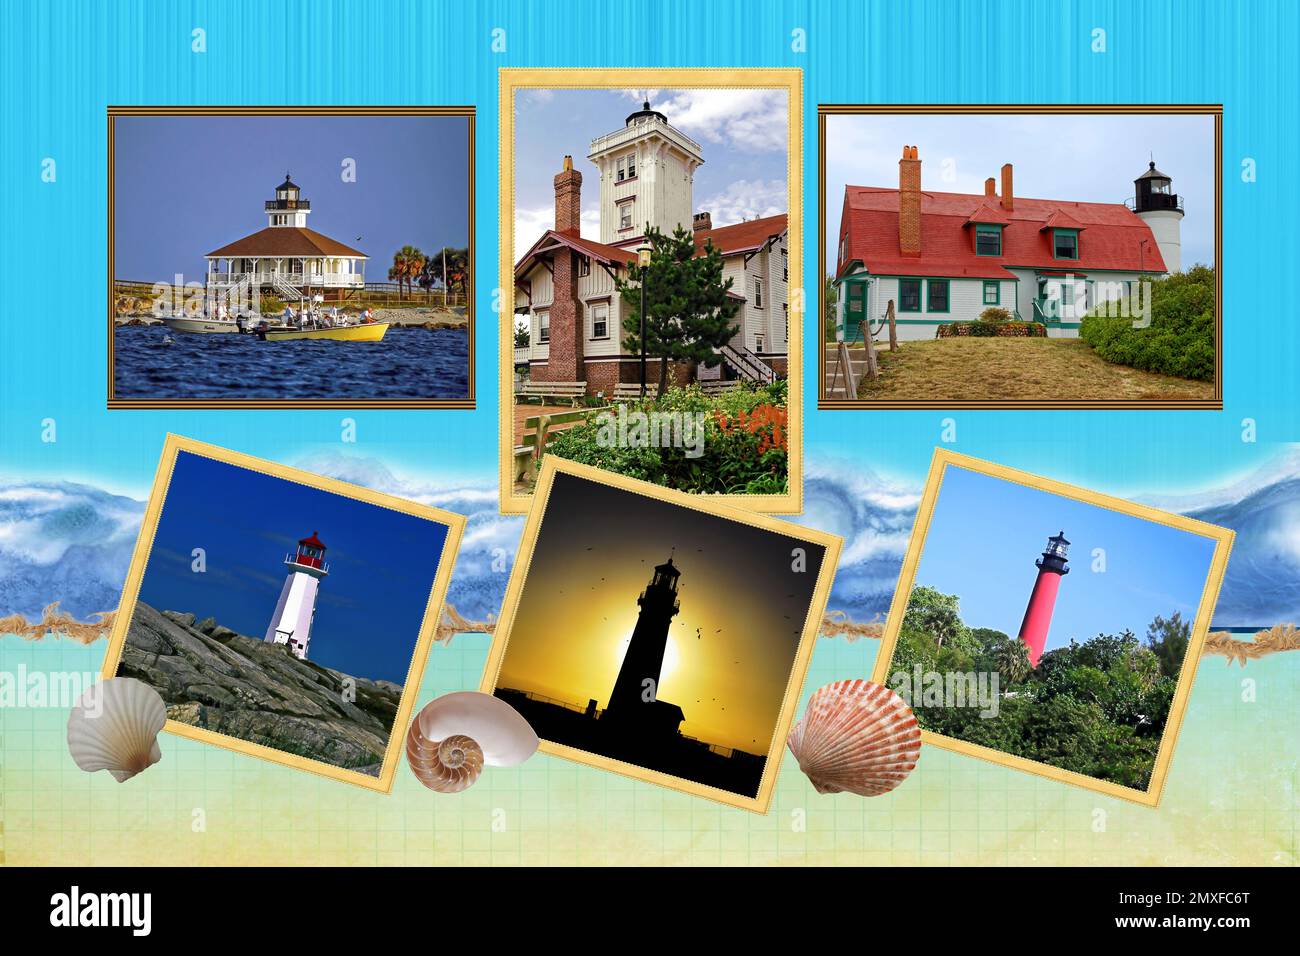 lighthouse collage, 6 photos, varied appearances, sea background, large 20x30 inches, colorful, beacons, aids to navigation, maritime, marine Stock Photo